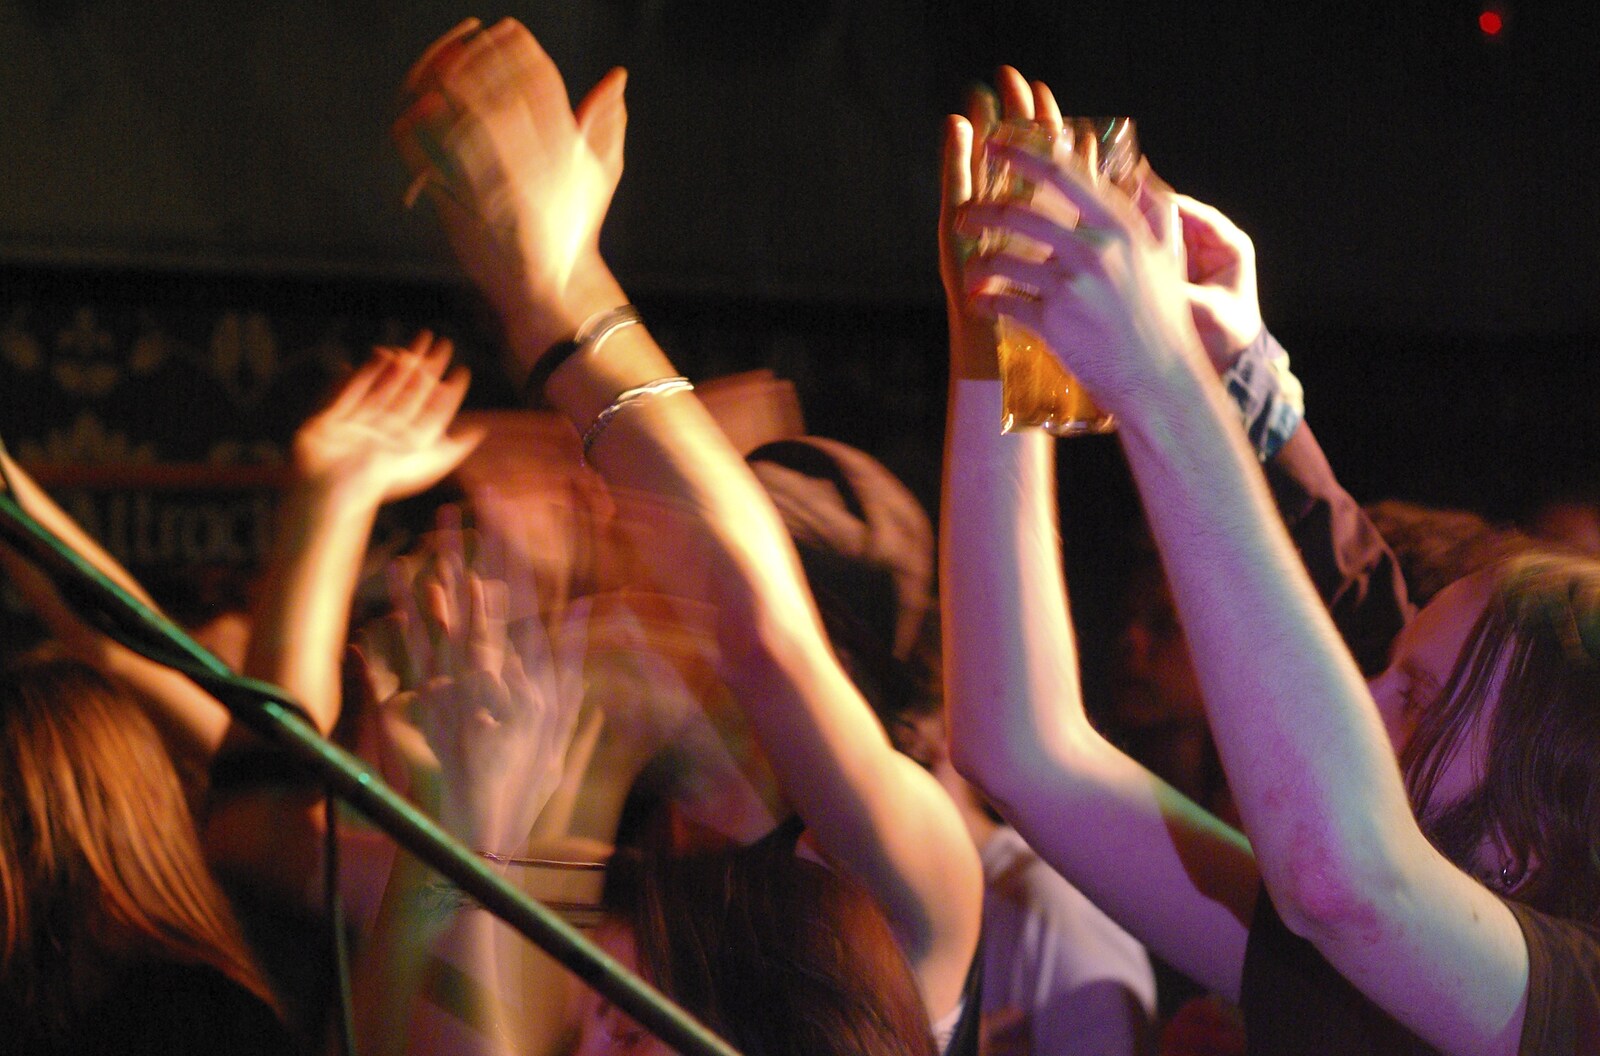 The Shivers Live at the Portland Arms, Cambridge - 26th August 2007: Audience applause